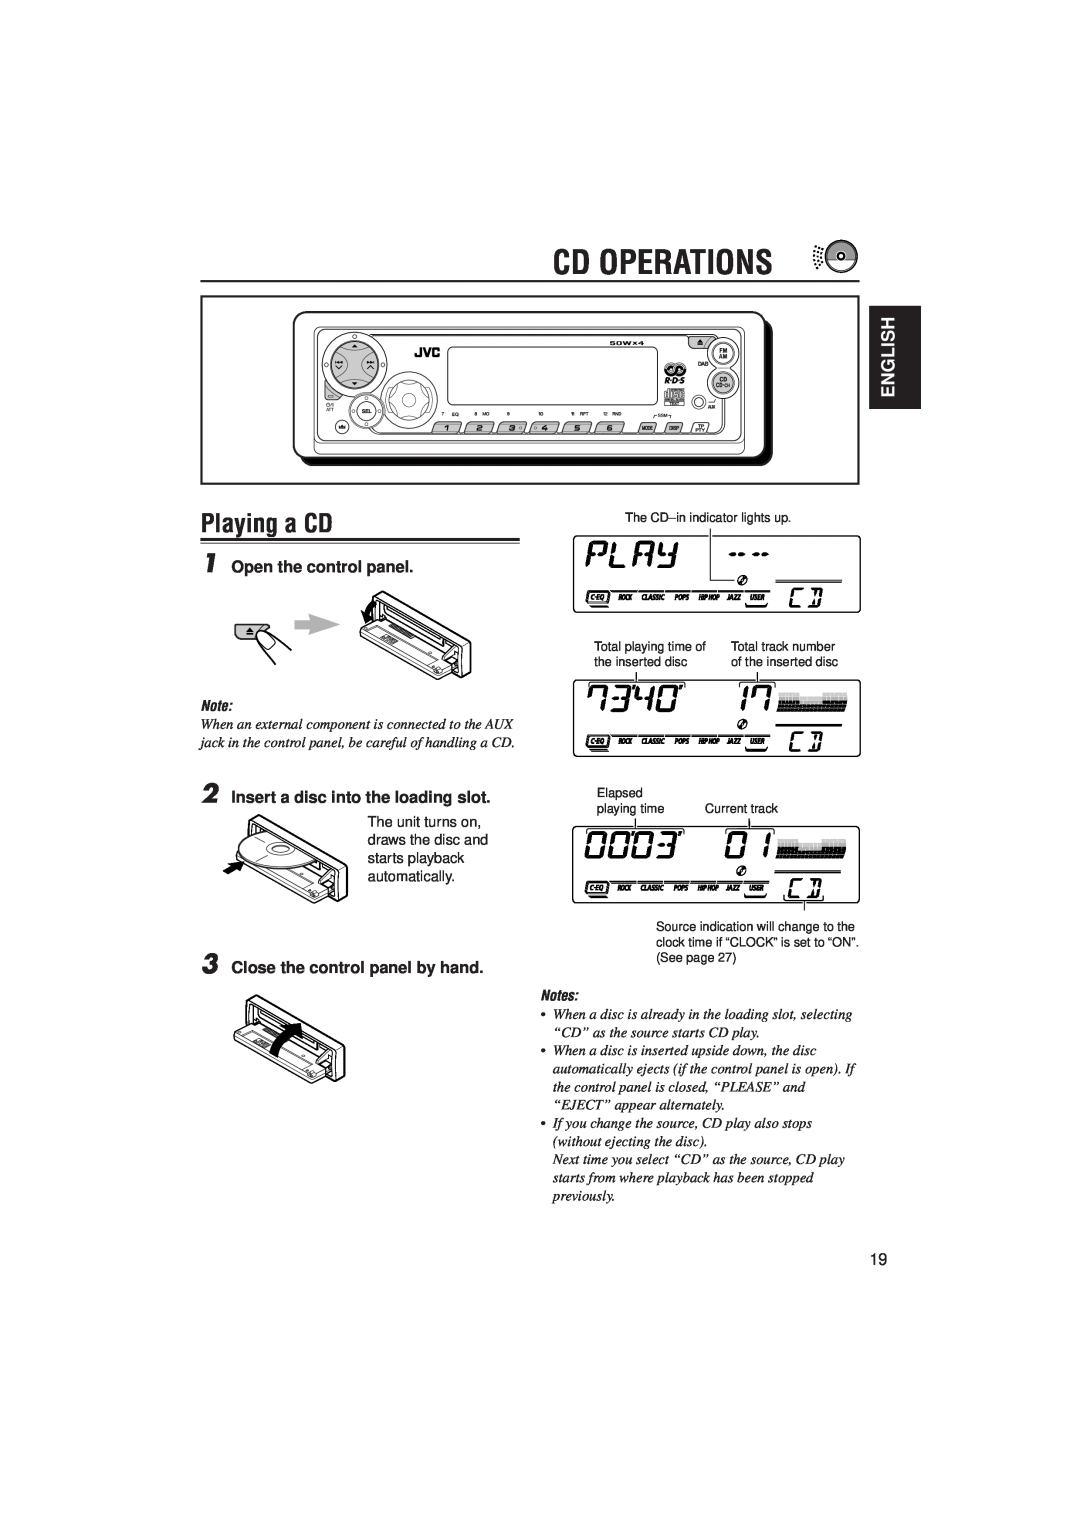 JVC KD-SX992R Cd Operations, Playing a CD, English, Open the control panel, Insert a disc into the loading slot, Notes 